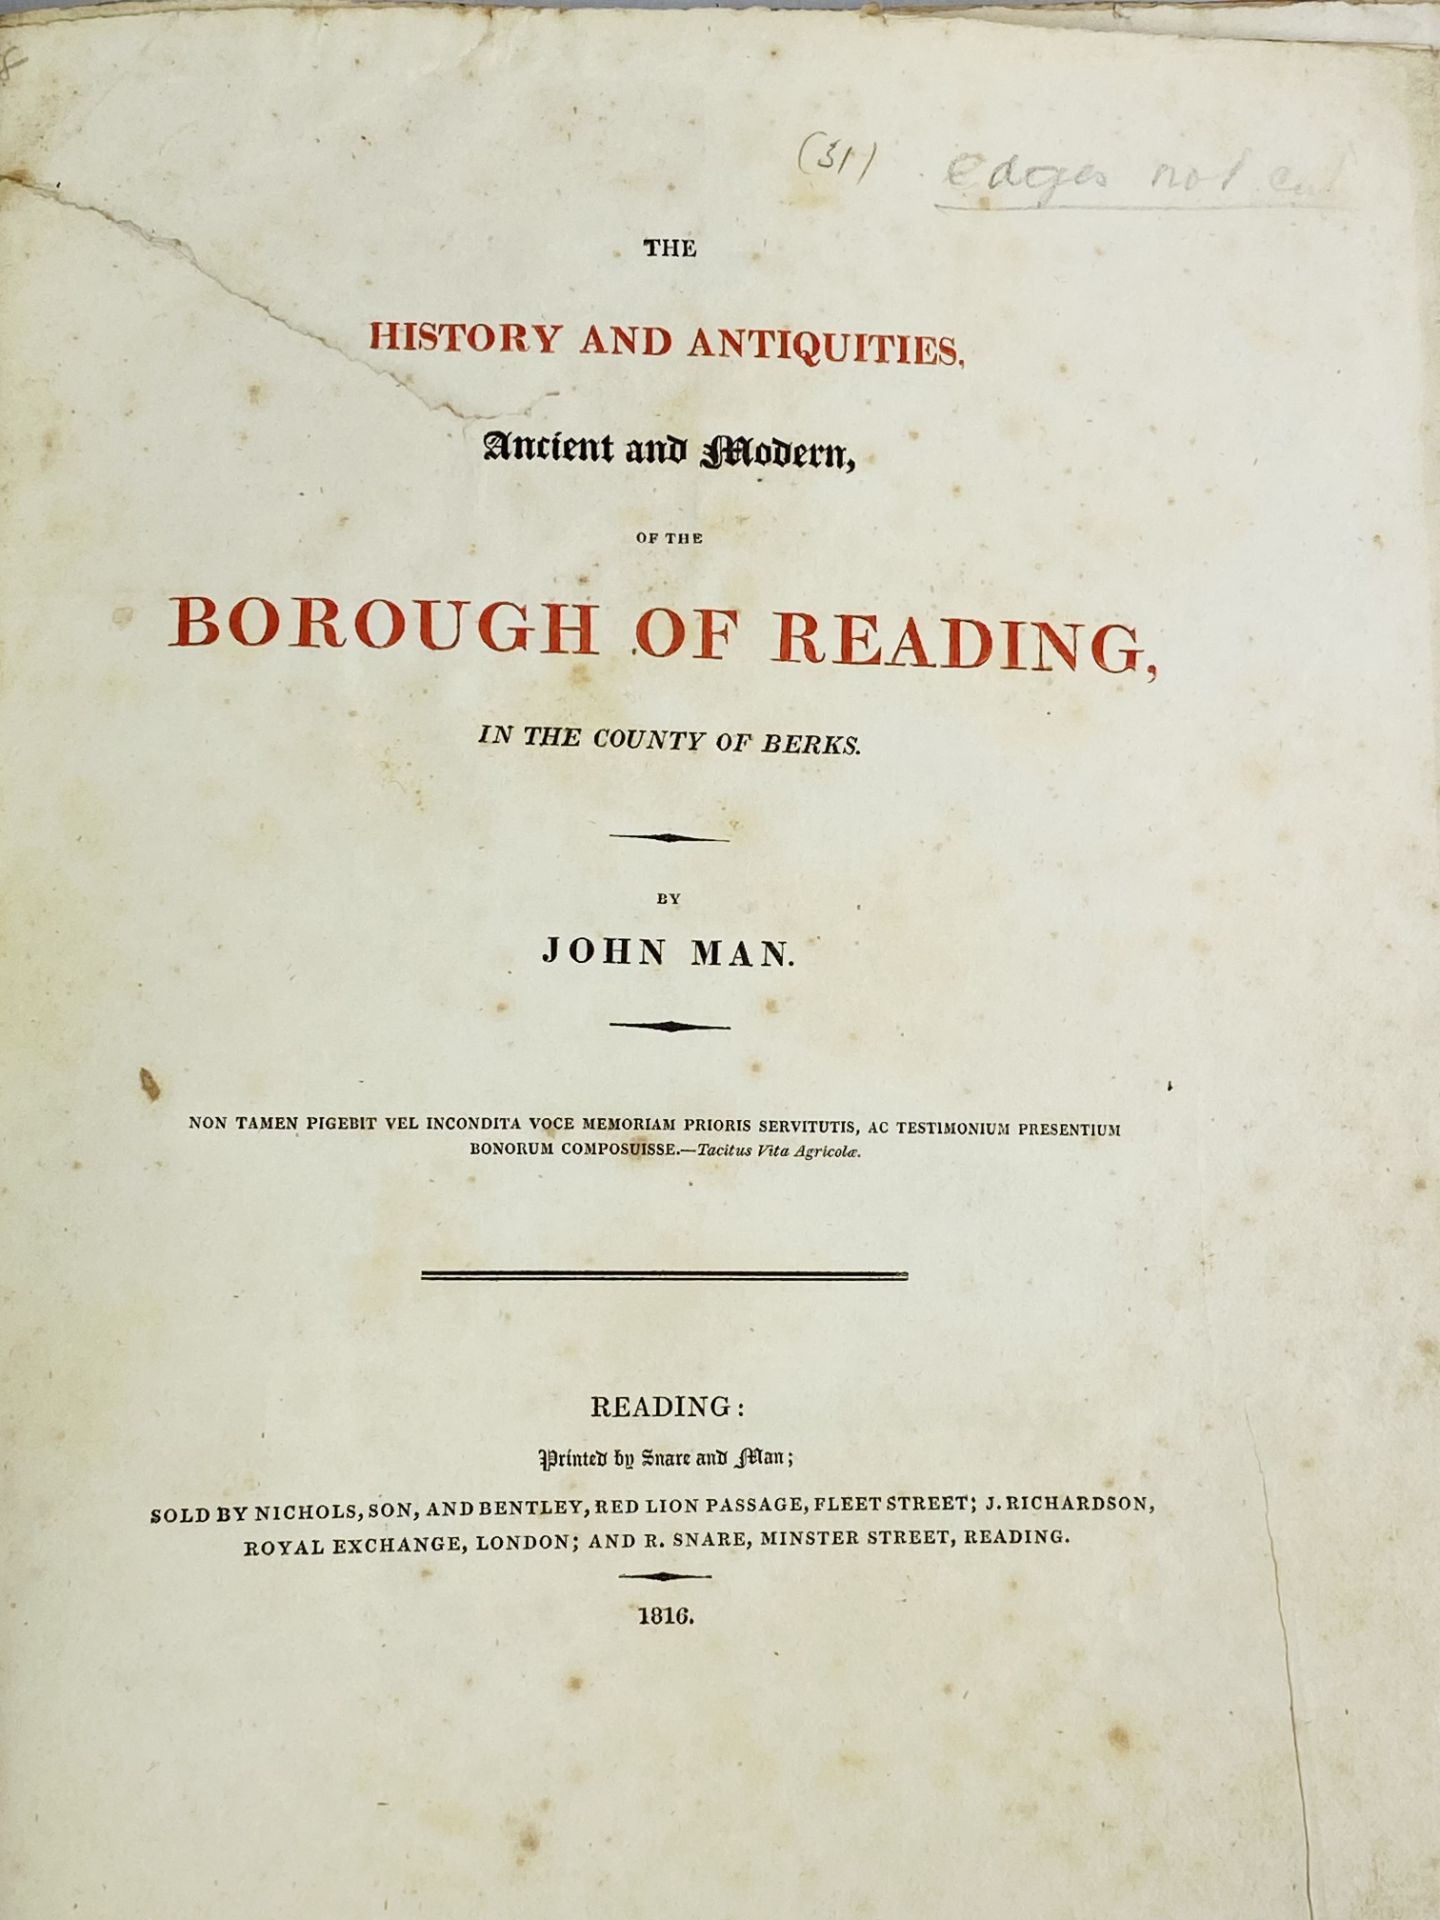 The History and Antiquities of the Borough of Reading by John Man, 1816 - Image 2 of 4